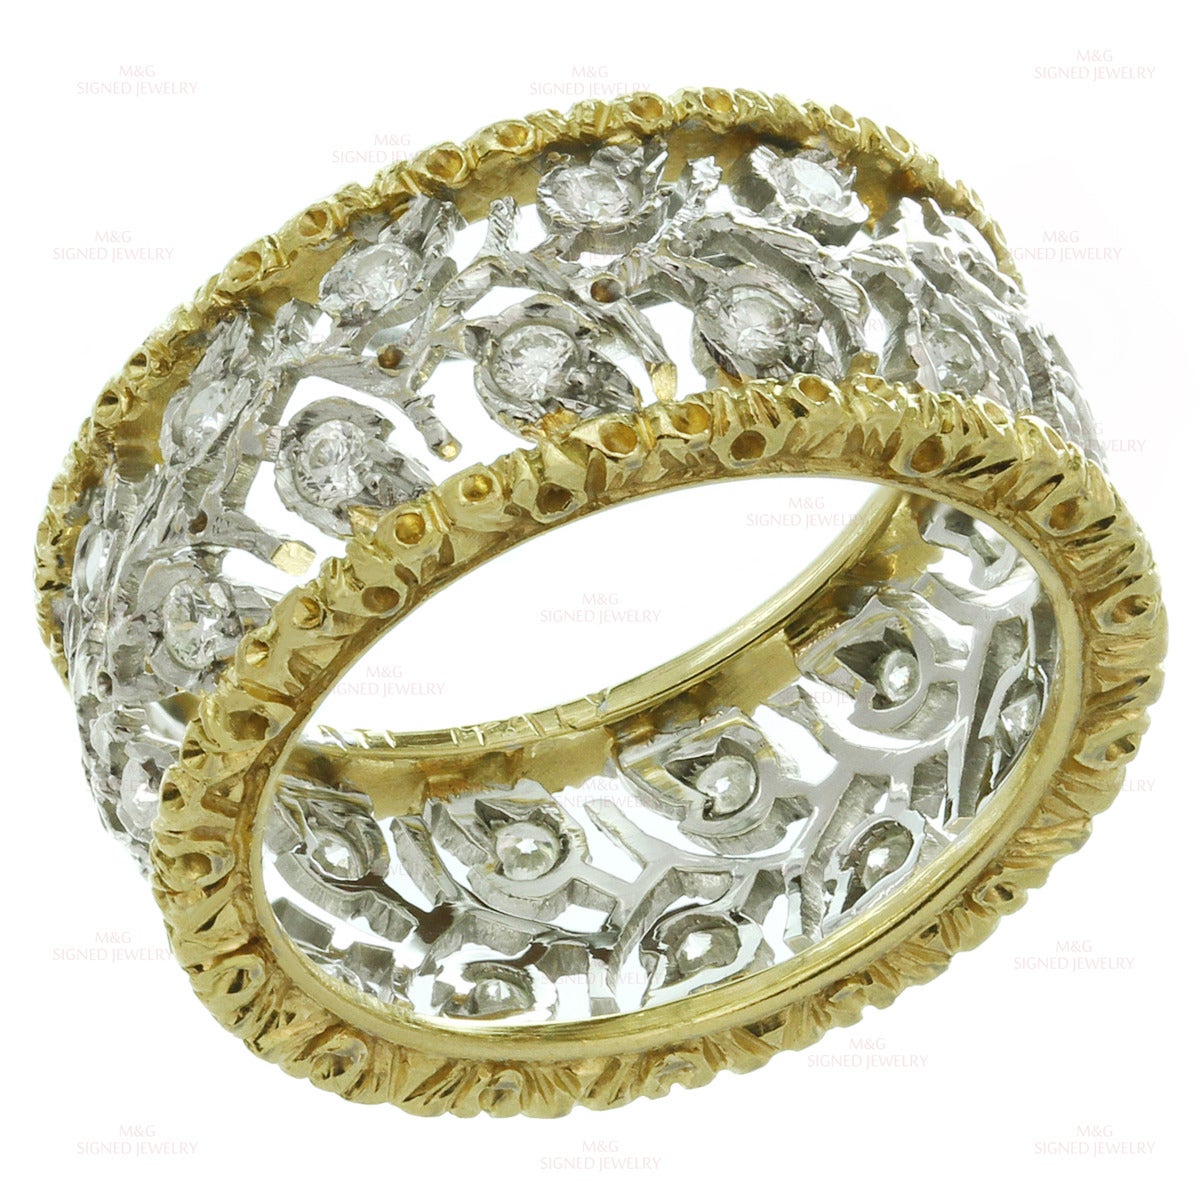 This elegant band ring from the Ramage Eternelle by Mario Buccellati features a filigree branched leaf design crafted in 18k white gold with an 18k yellow gold border and set with sparkling brilliant-cut round F-G VVS2-VS1 diamonds of an estimated